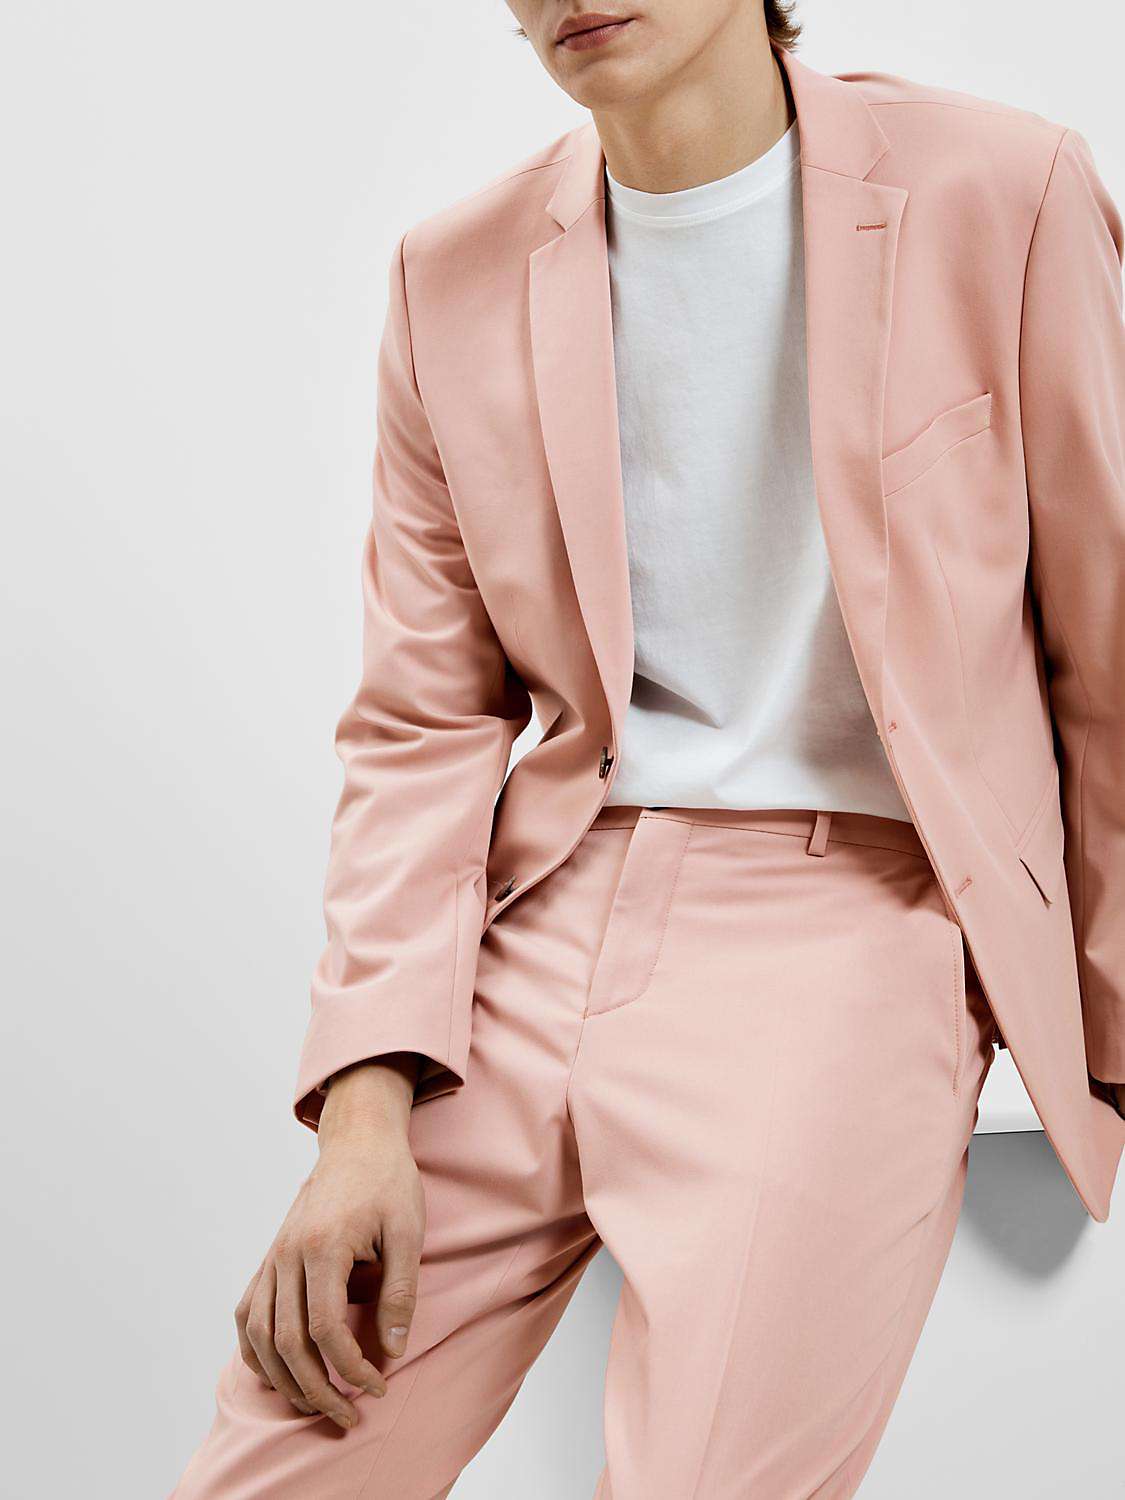 Buy SELECTED HOMME Liam Slim Fit Suit Trousers, Misty Rose Online at johnlewis.com